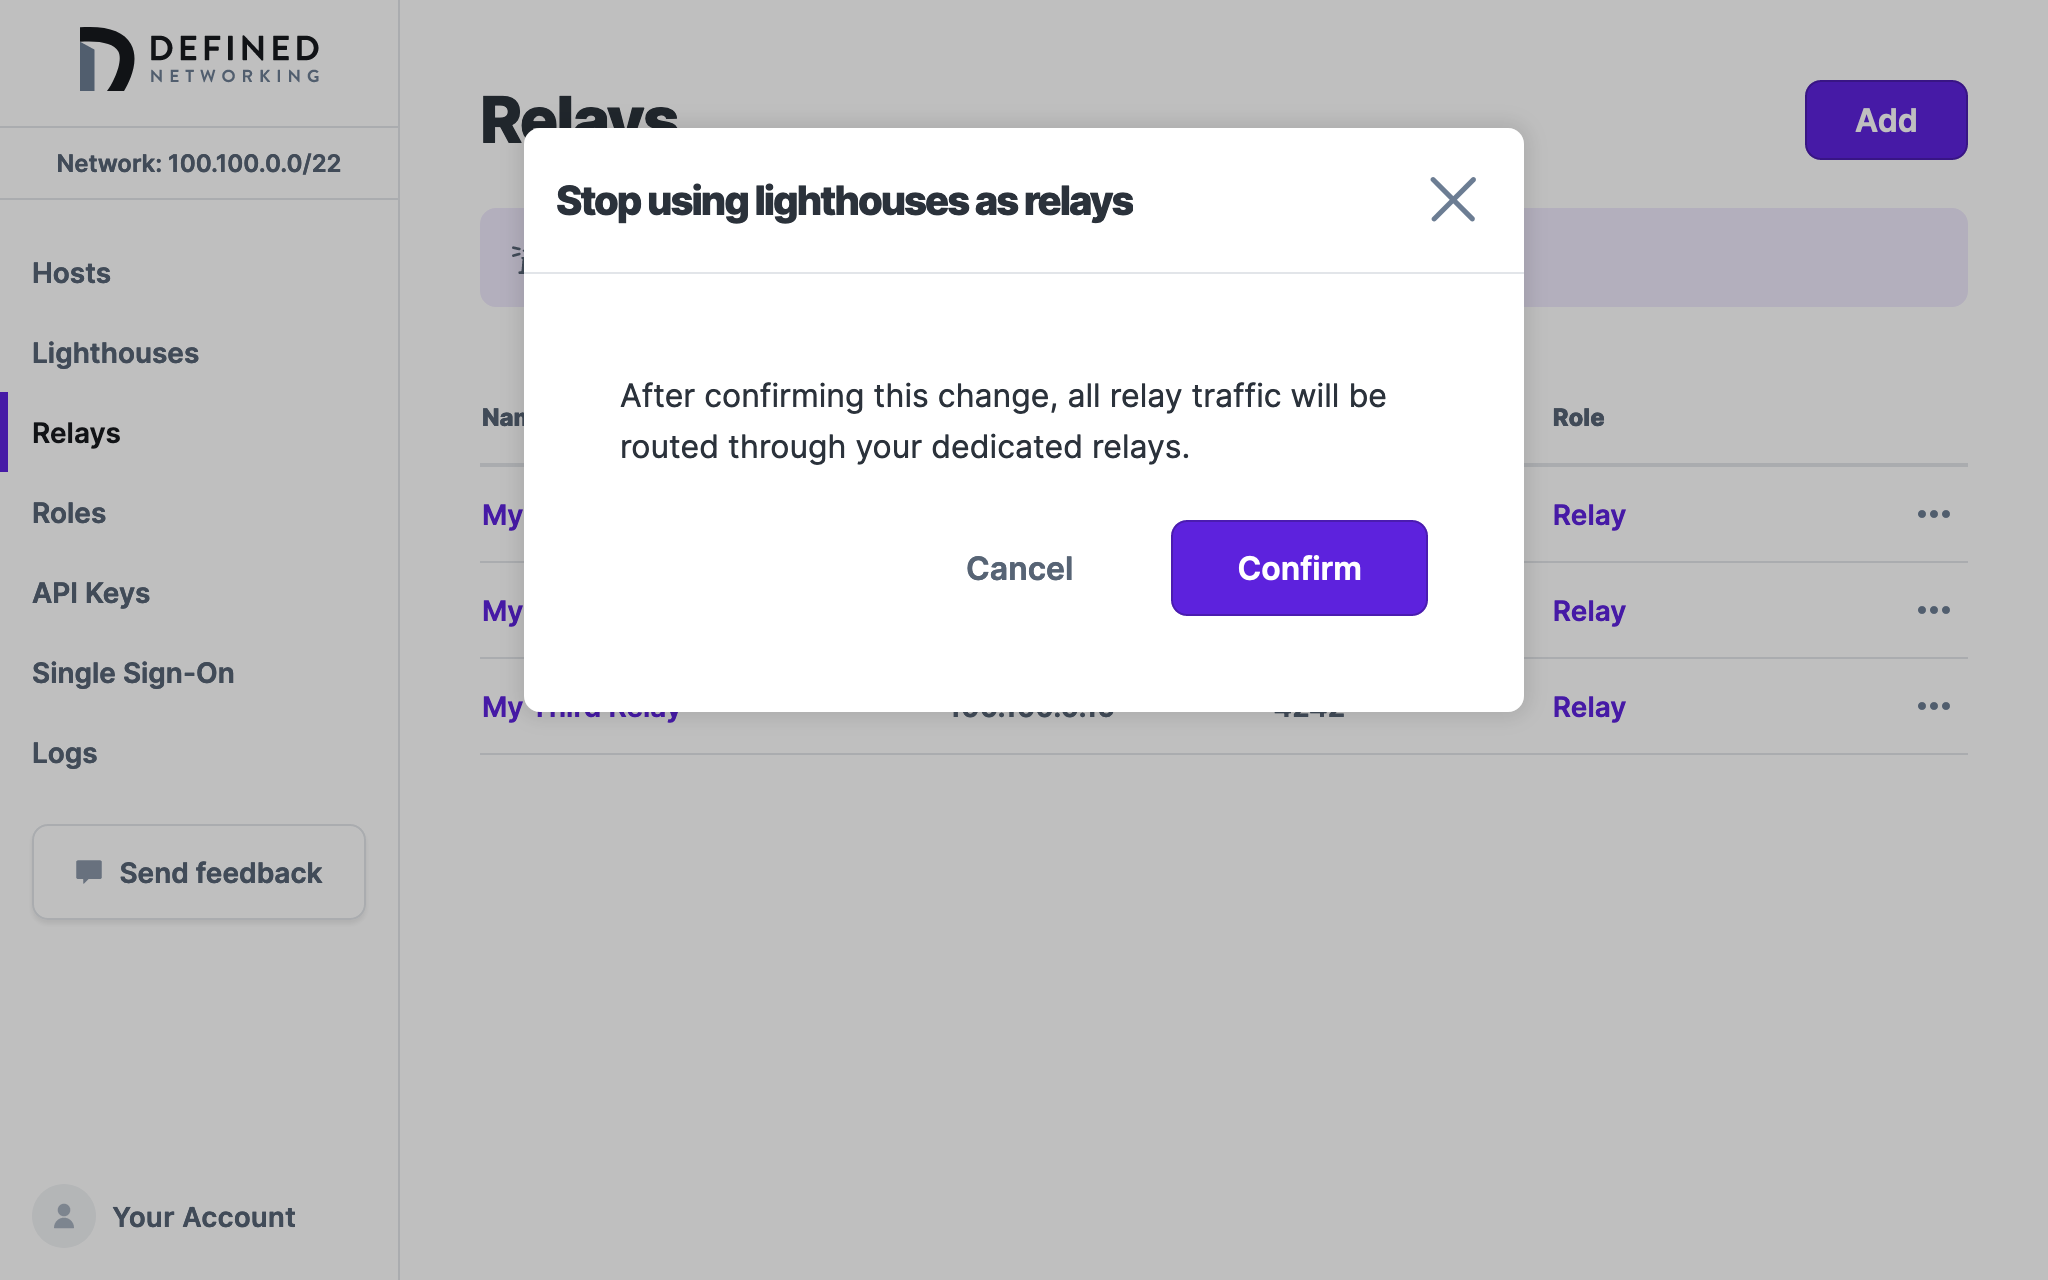 Modal titled 'Stop using lighthouses as relays', with subtext 'After confirming this change, all relay traffic will be routed through your dedicated relays.'